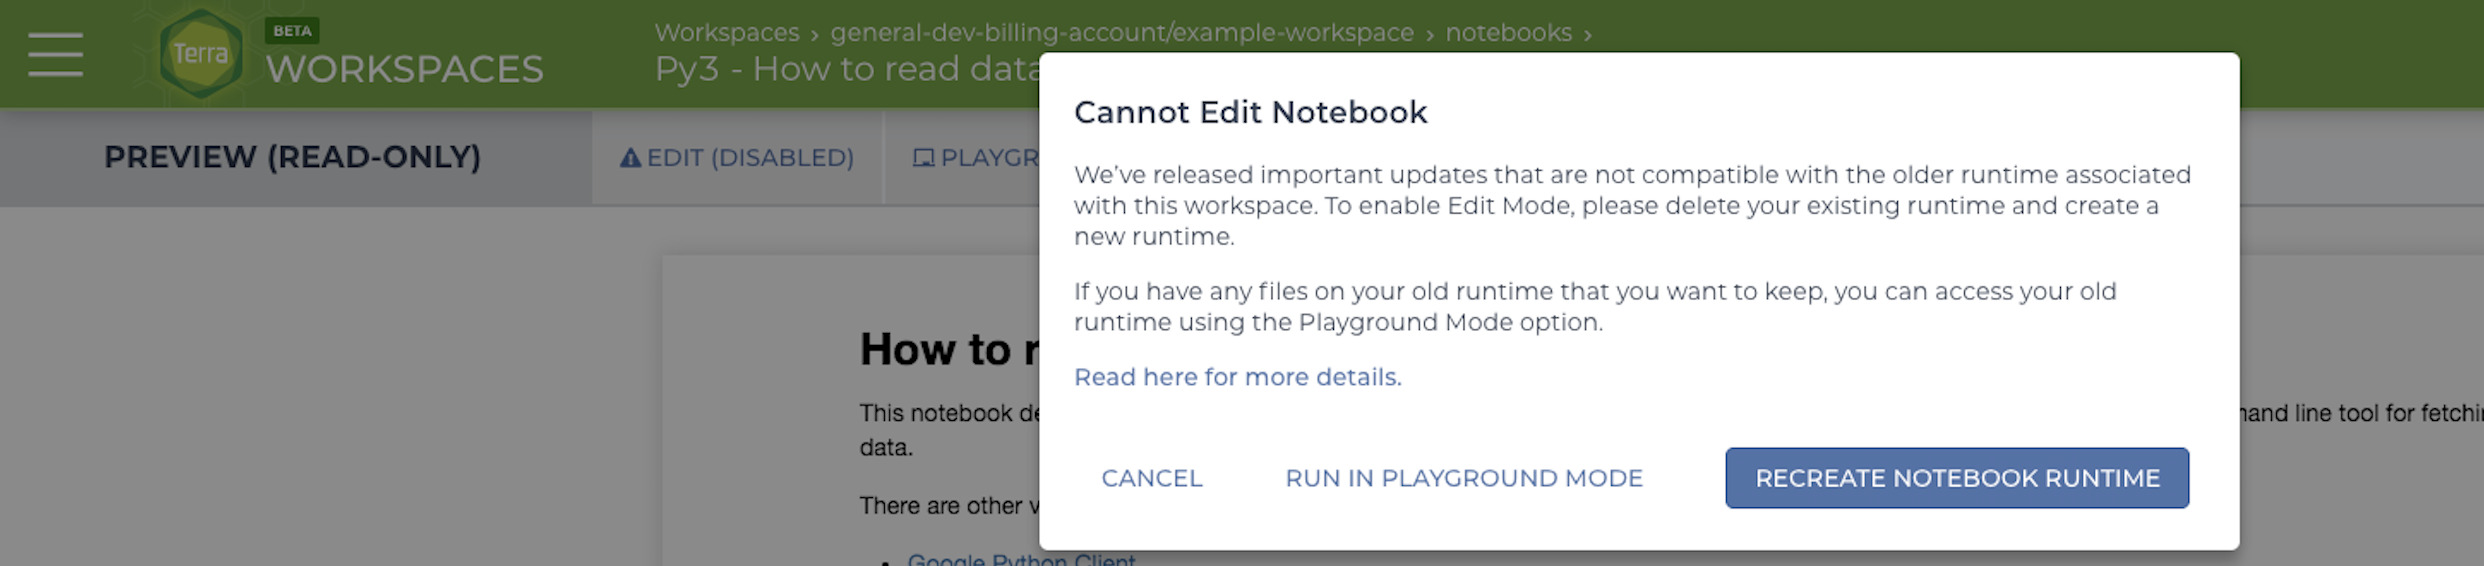 An alert popup indicating that the user cannot run the notebook because it is not compatible with modern runtimes. An option is given to recreate the notebook runtime.